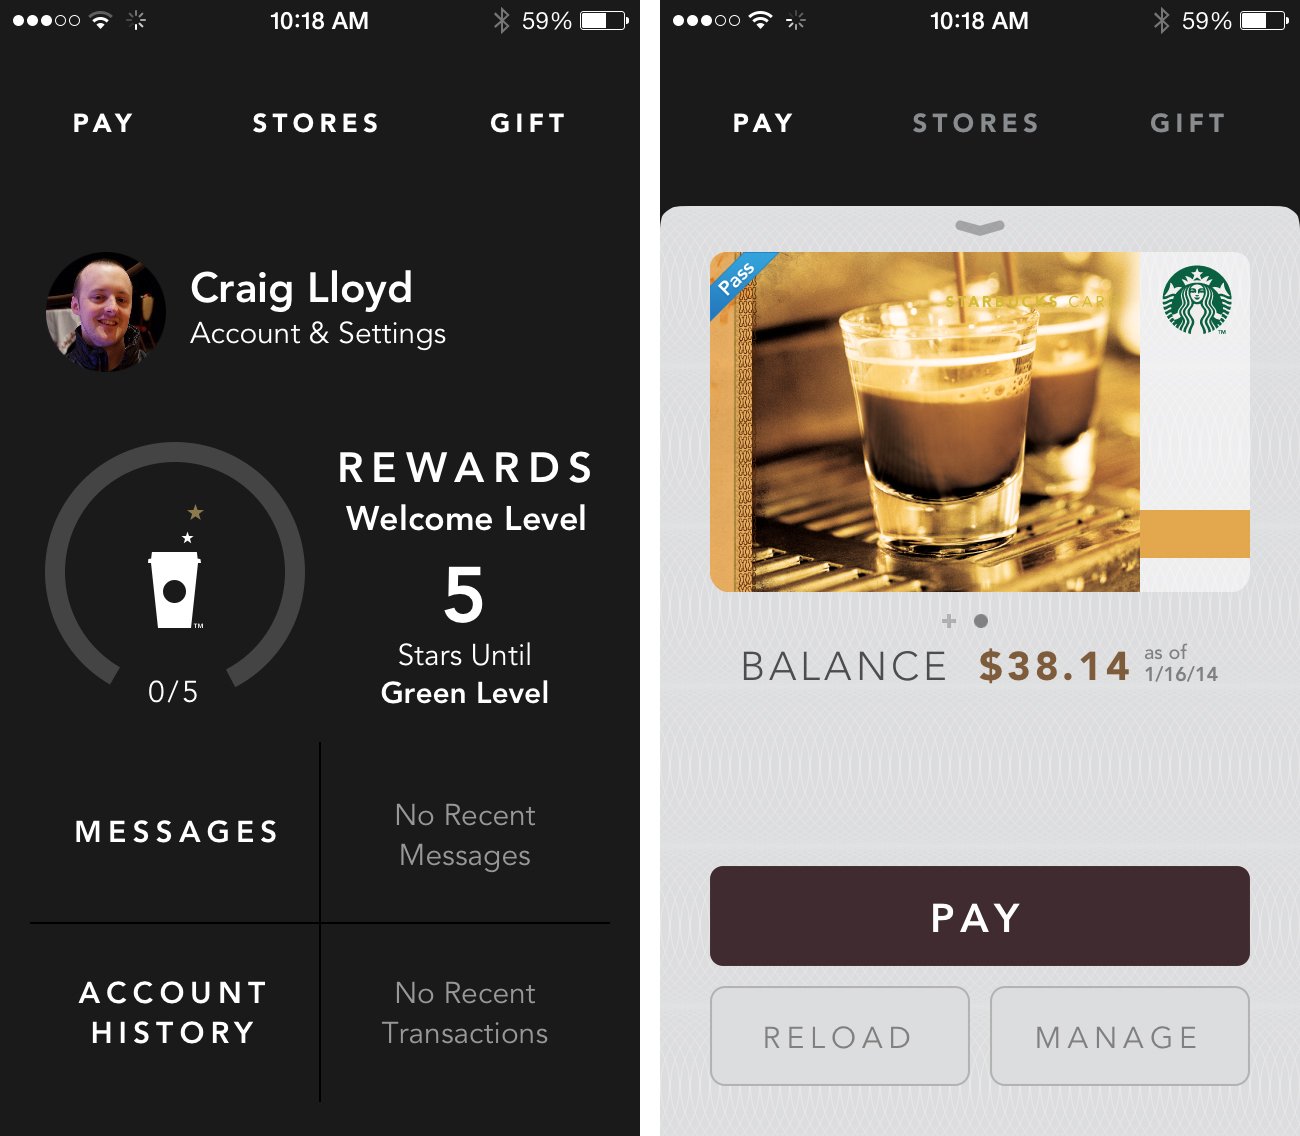 Starbucks iPhone app updated with new features